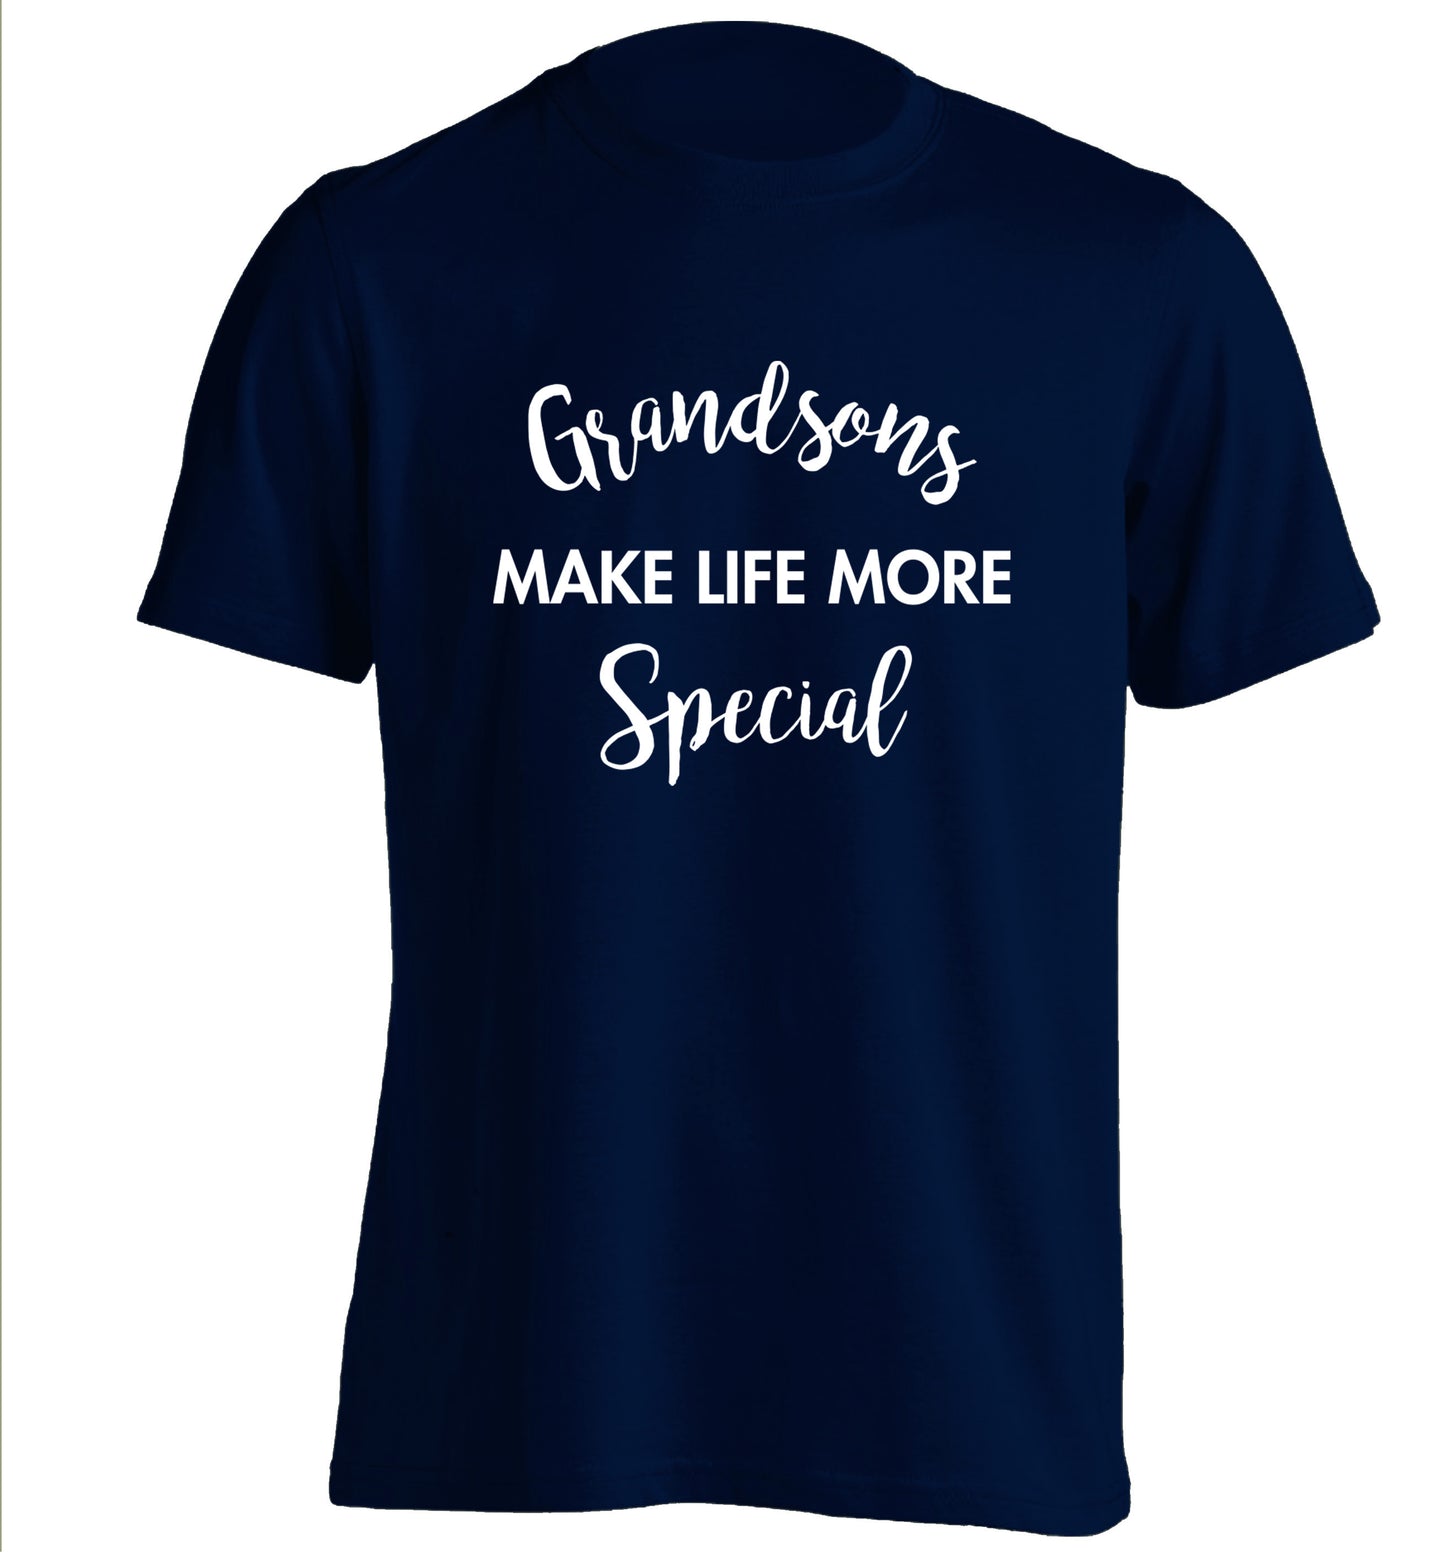 Grandsons make life more special adults unisex navy Tshirt 2XL